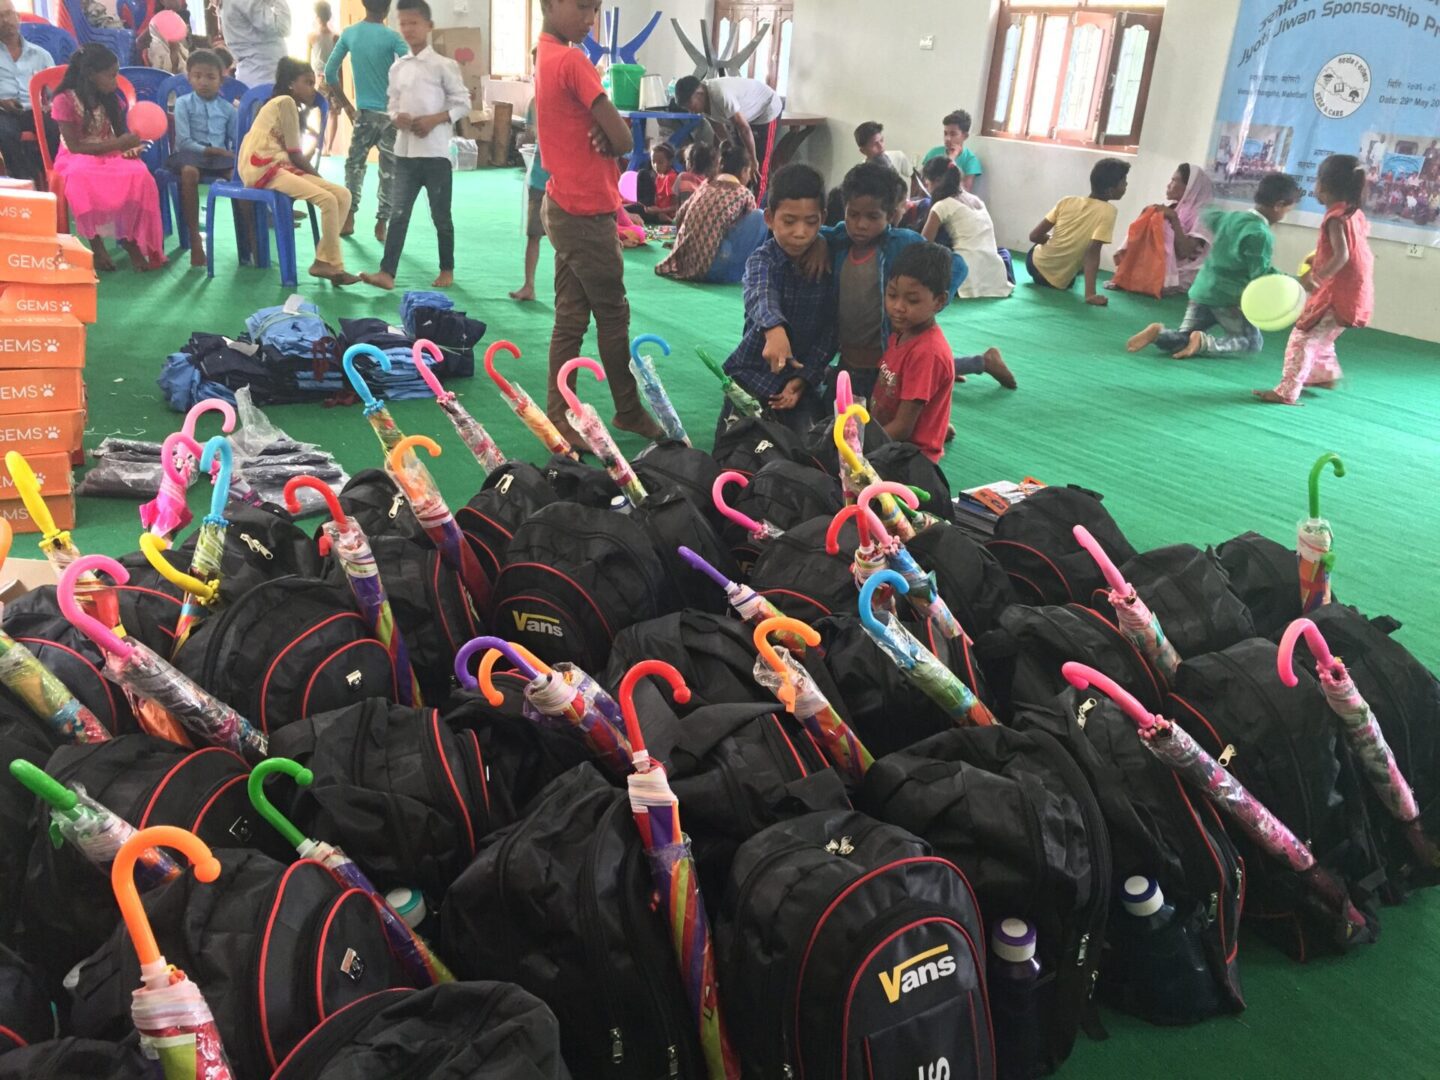 A group of children sitting around some backpacks